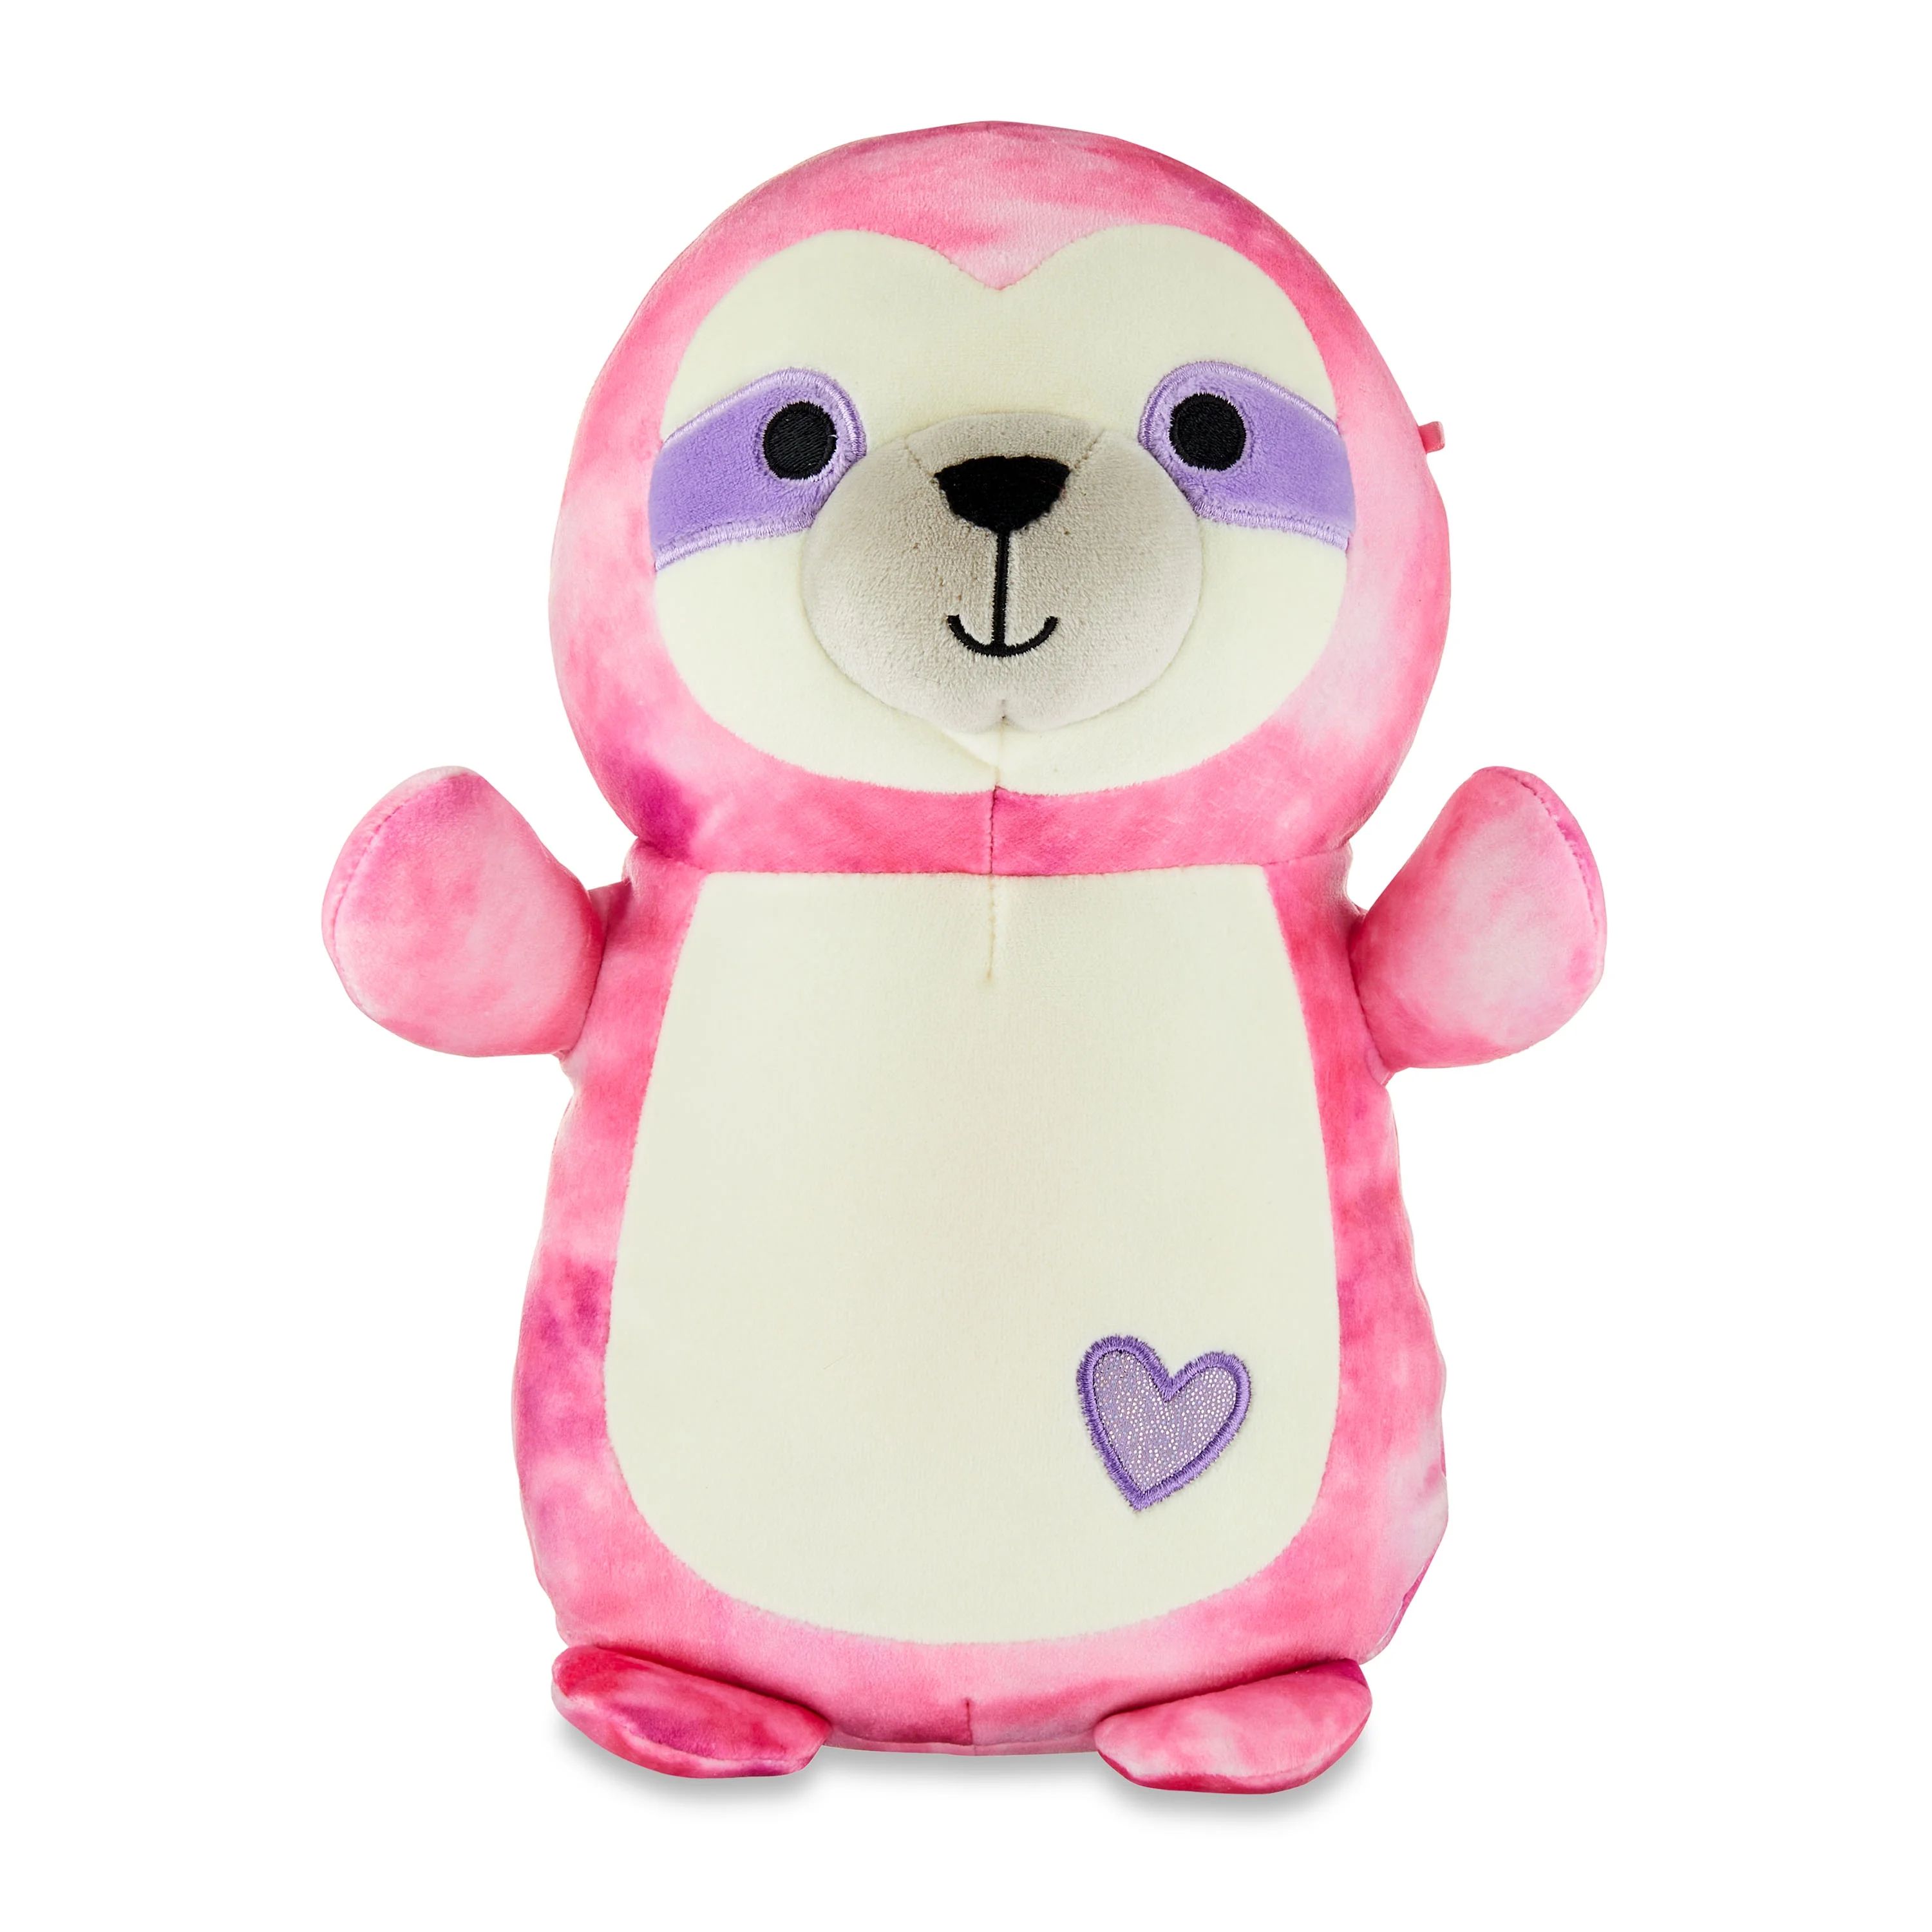 Squishmallows Official Hugmee Plush 10 inch Pink Sloth - Child's Ultra Soft Stuffed Plush Toy | Walmart (US)